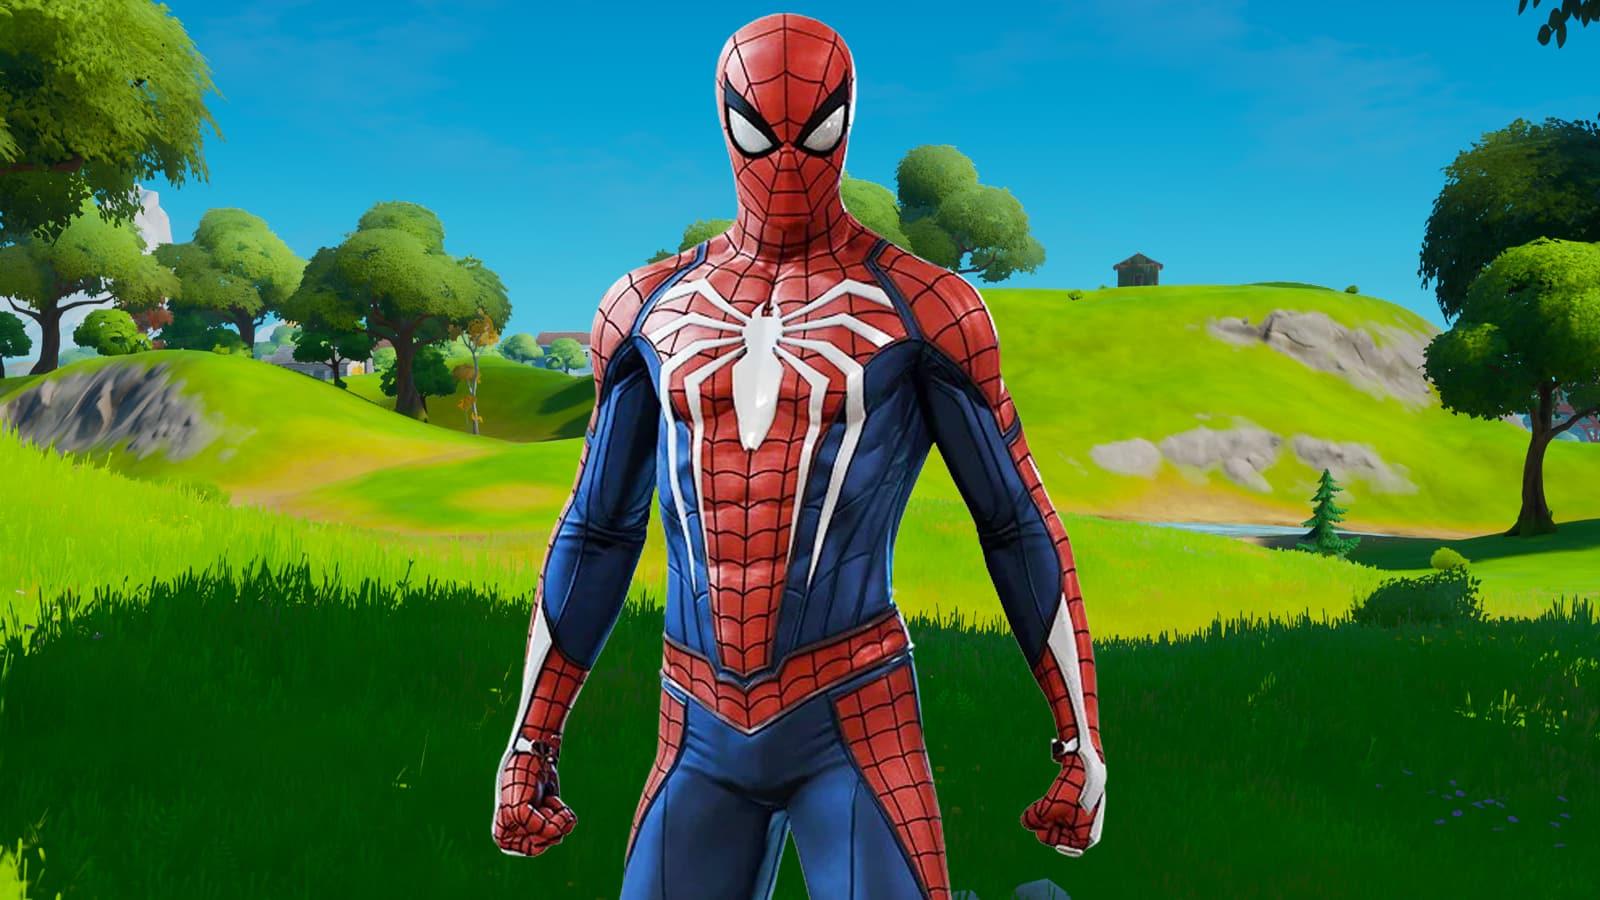 Spider-man on the Fortnite map